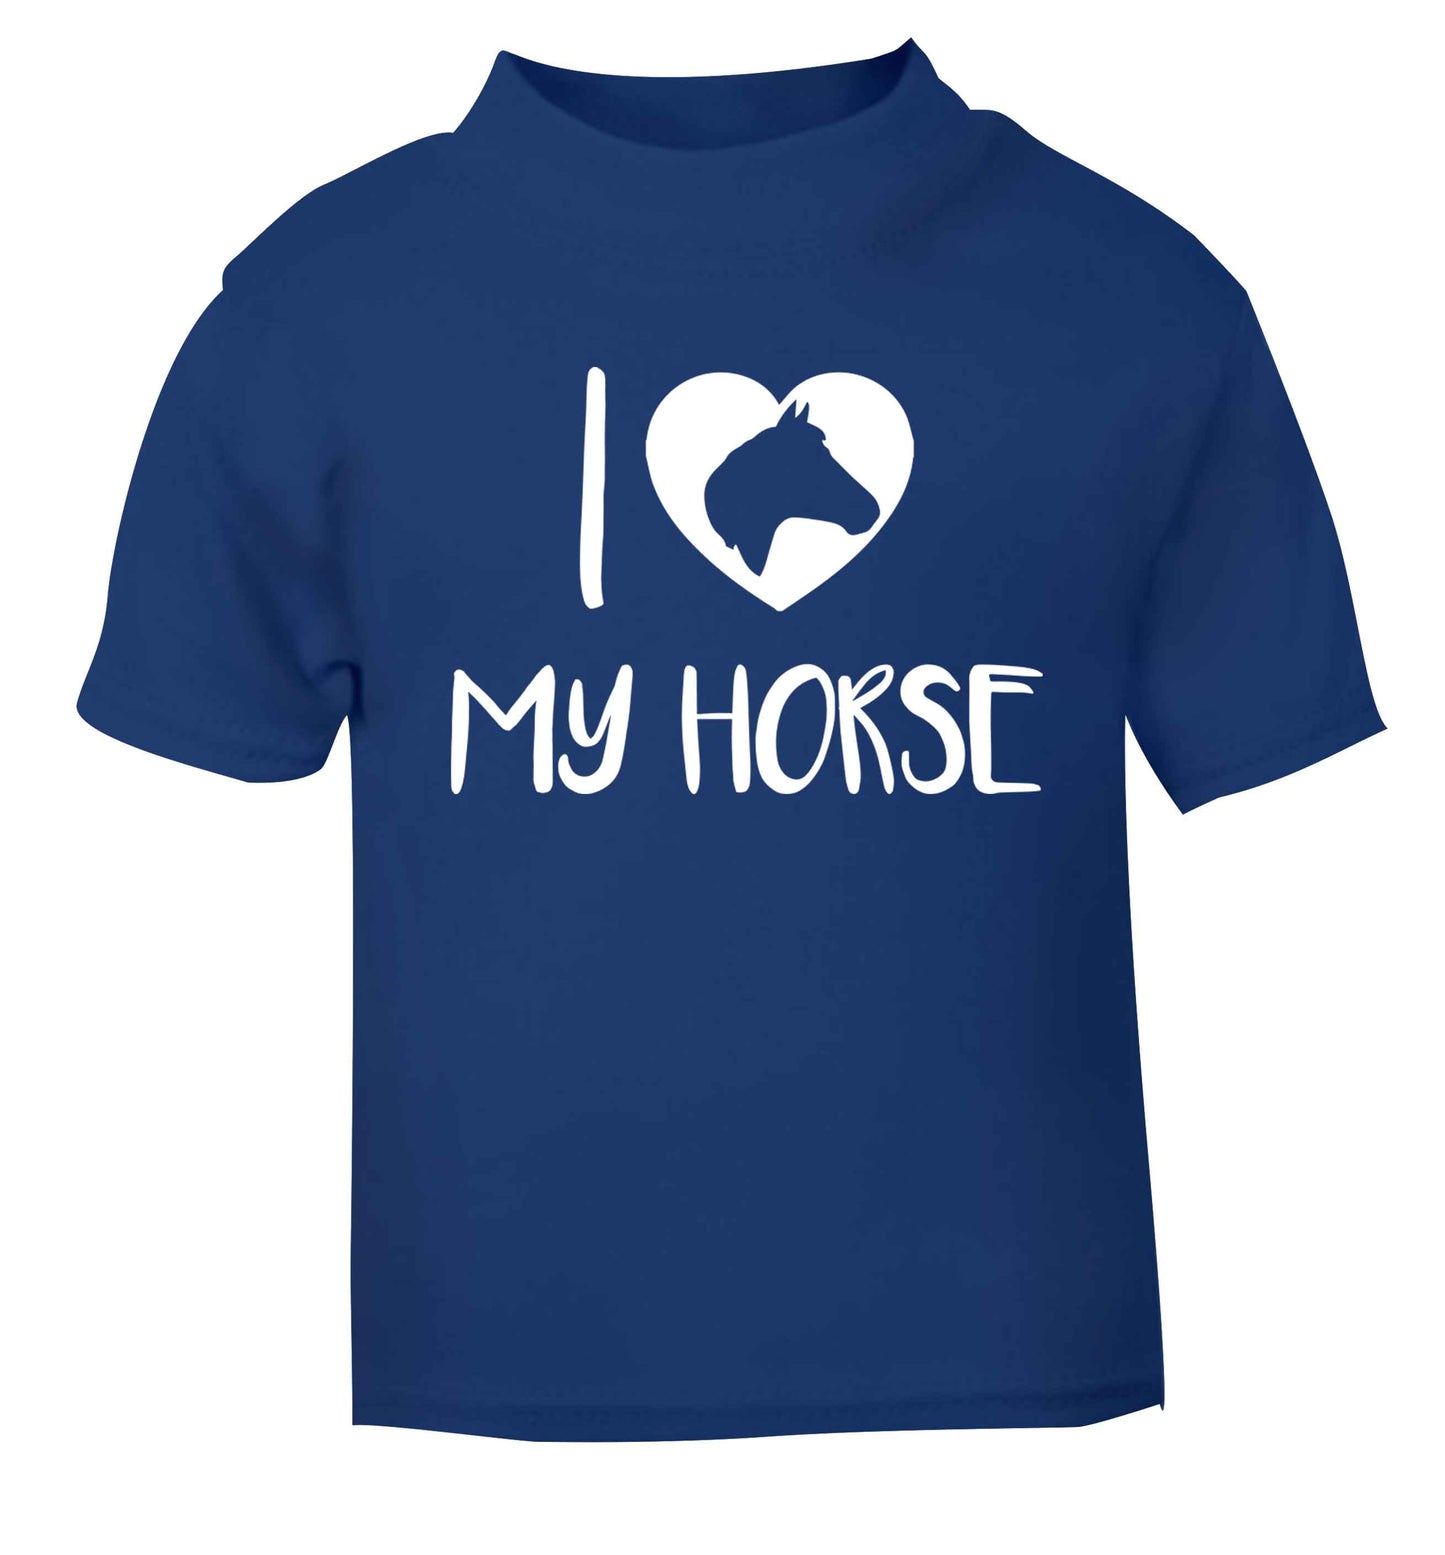 I love my horse blue baby toddler Tshirt 2 Years